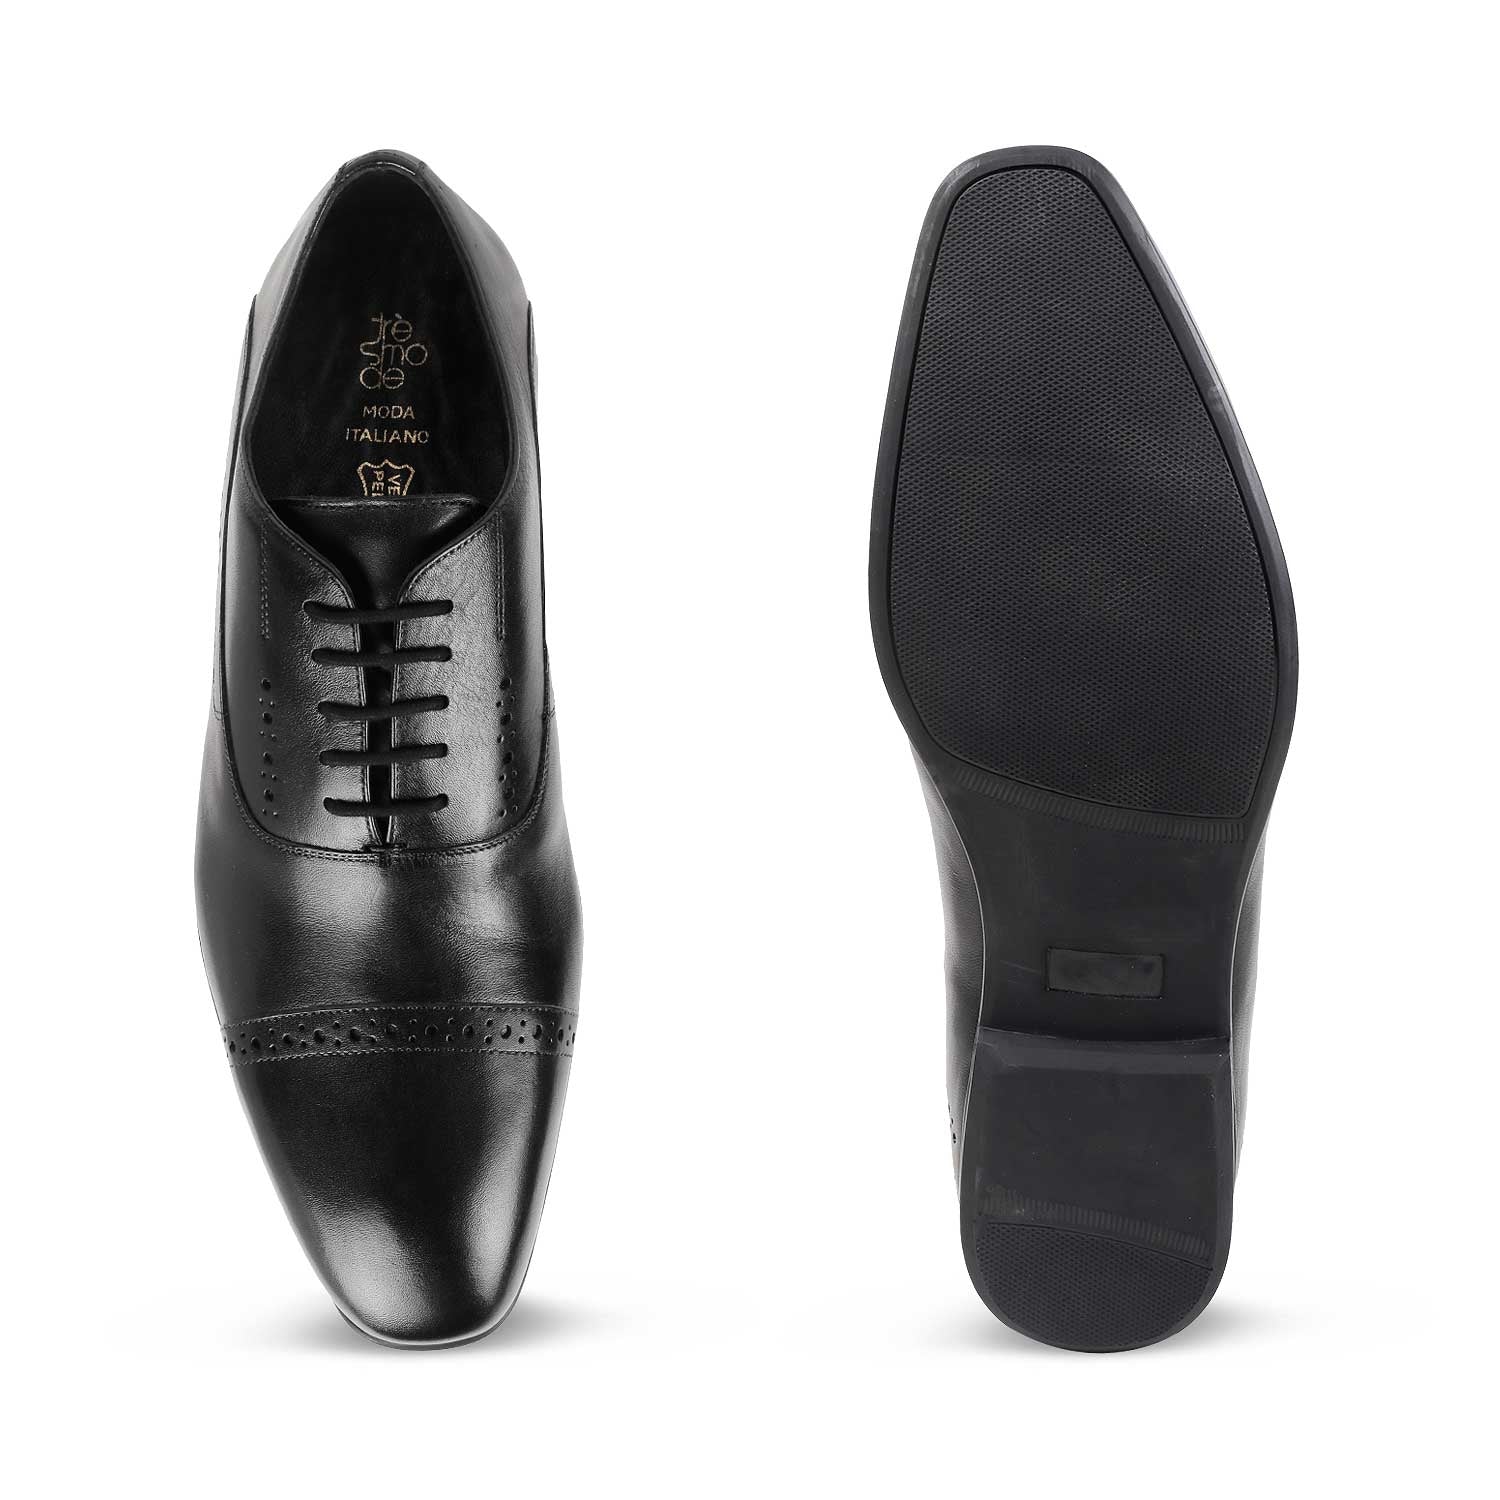 The Togford Black Men's Oxford Lace Ups Tresmode